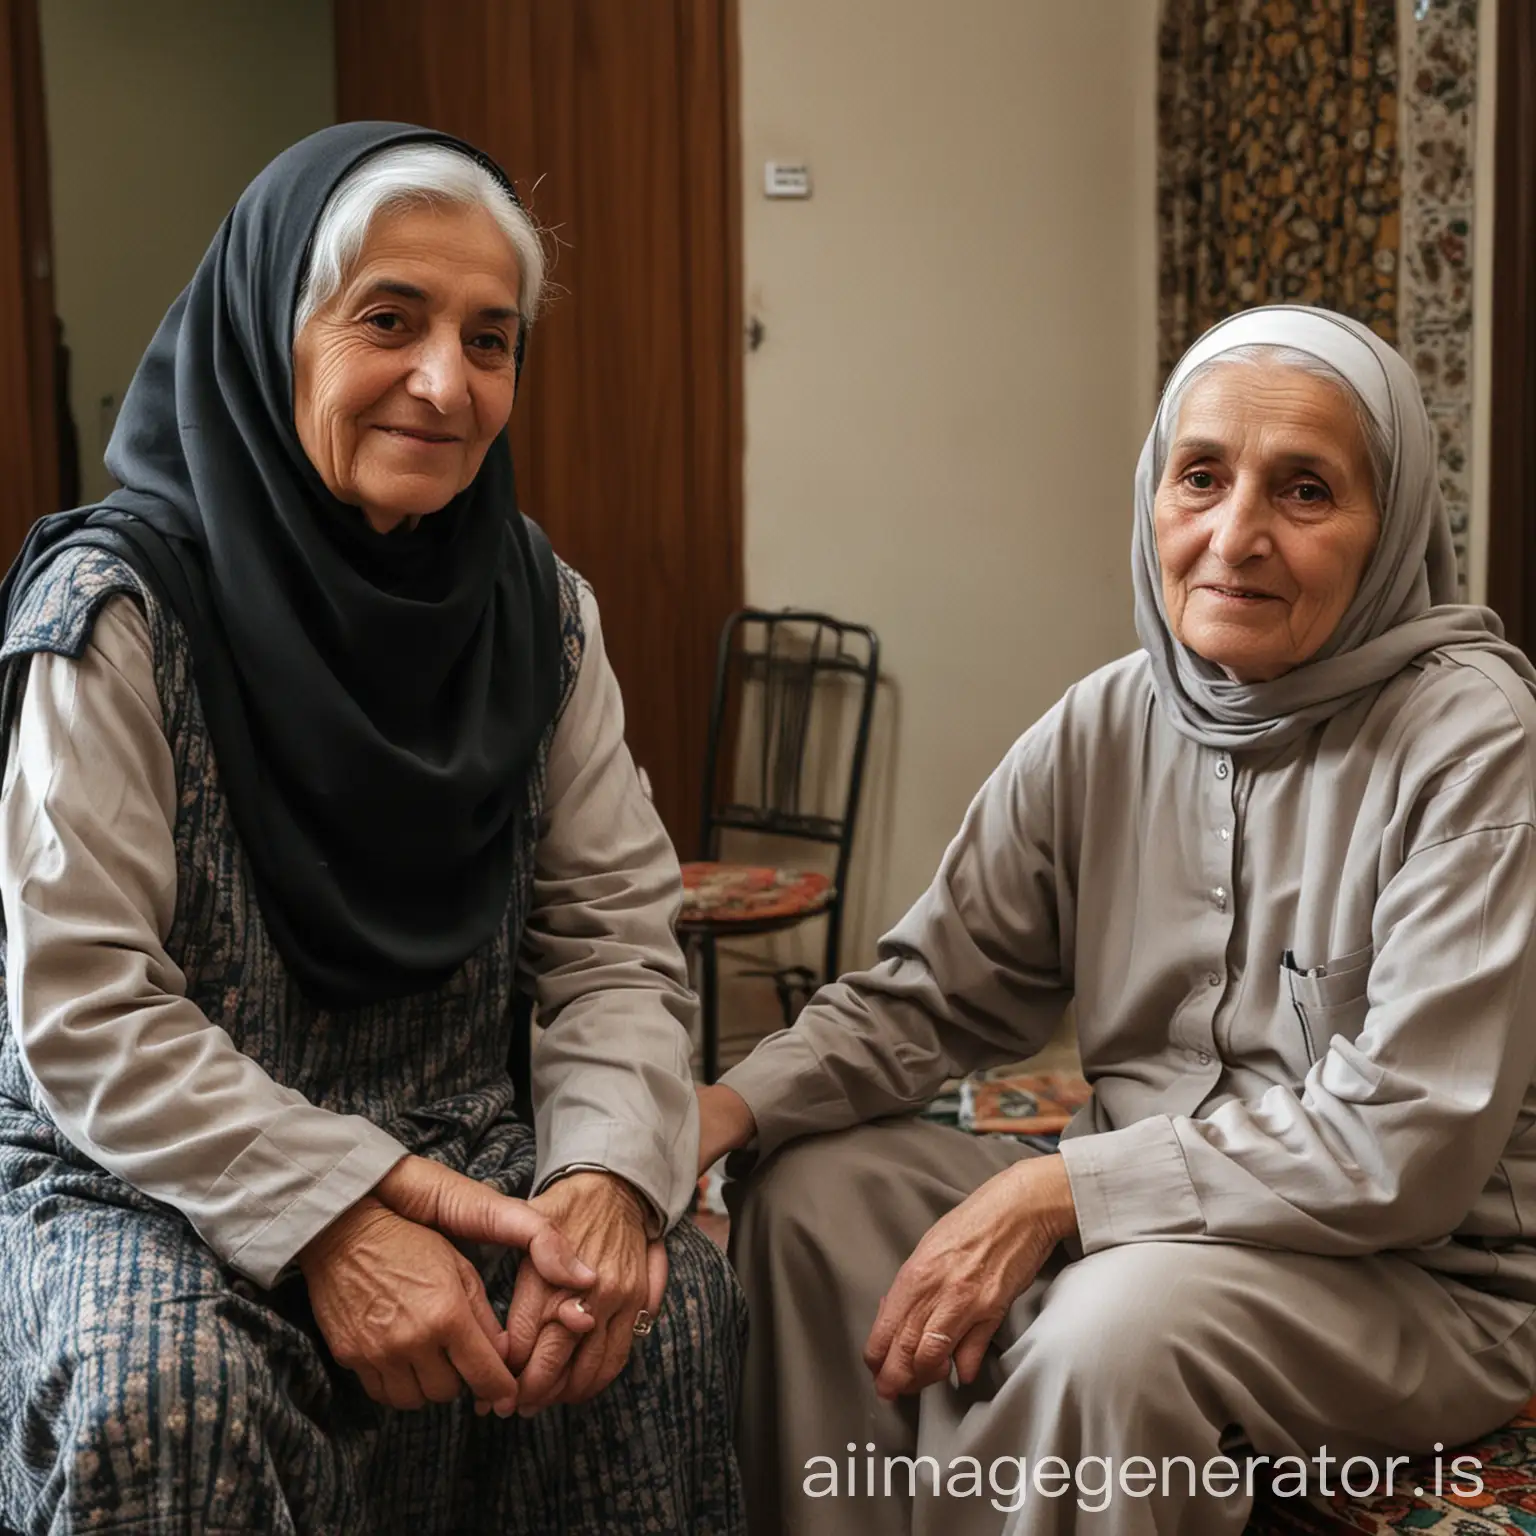 Caretaker-with-Iranian-Elderly-Woman-at-Home